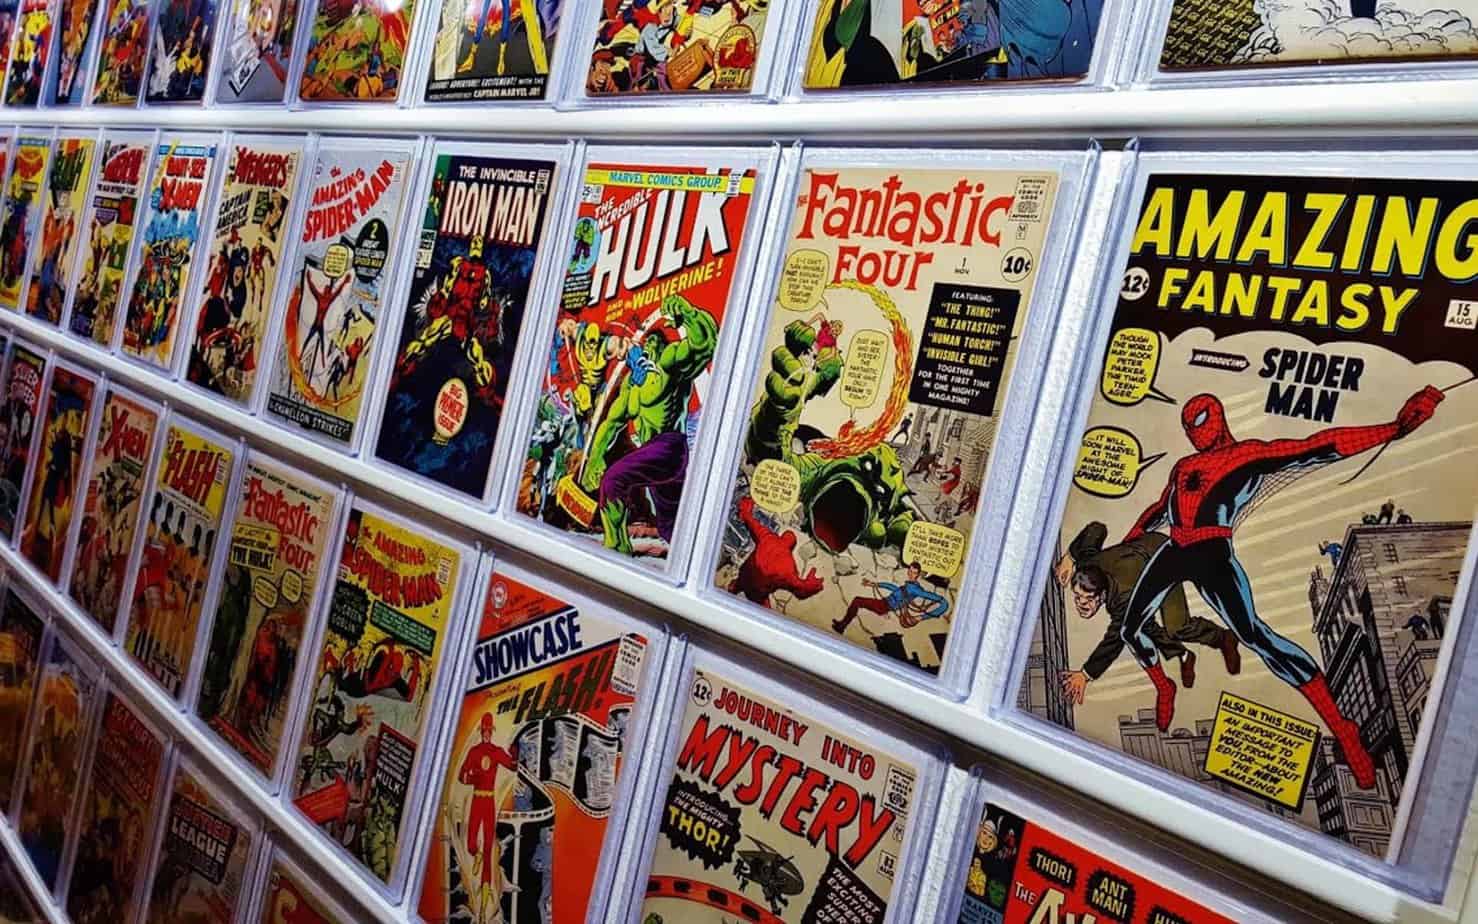 10 BEST COMIC BOOKS TO READ OVER QUARANTINE - Lose yourself in a new world